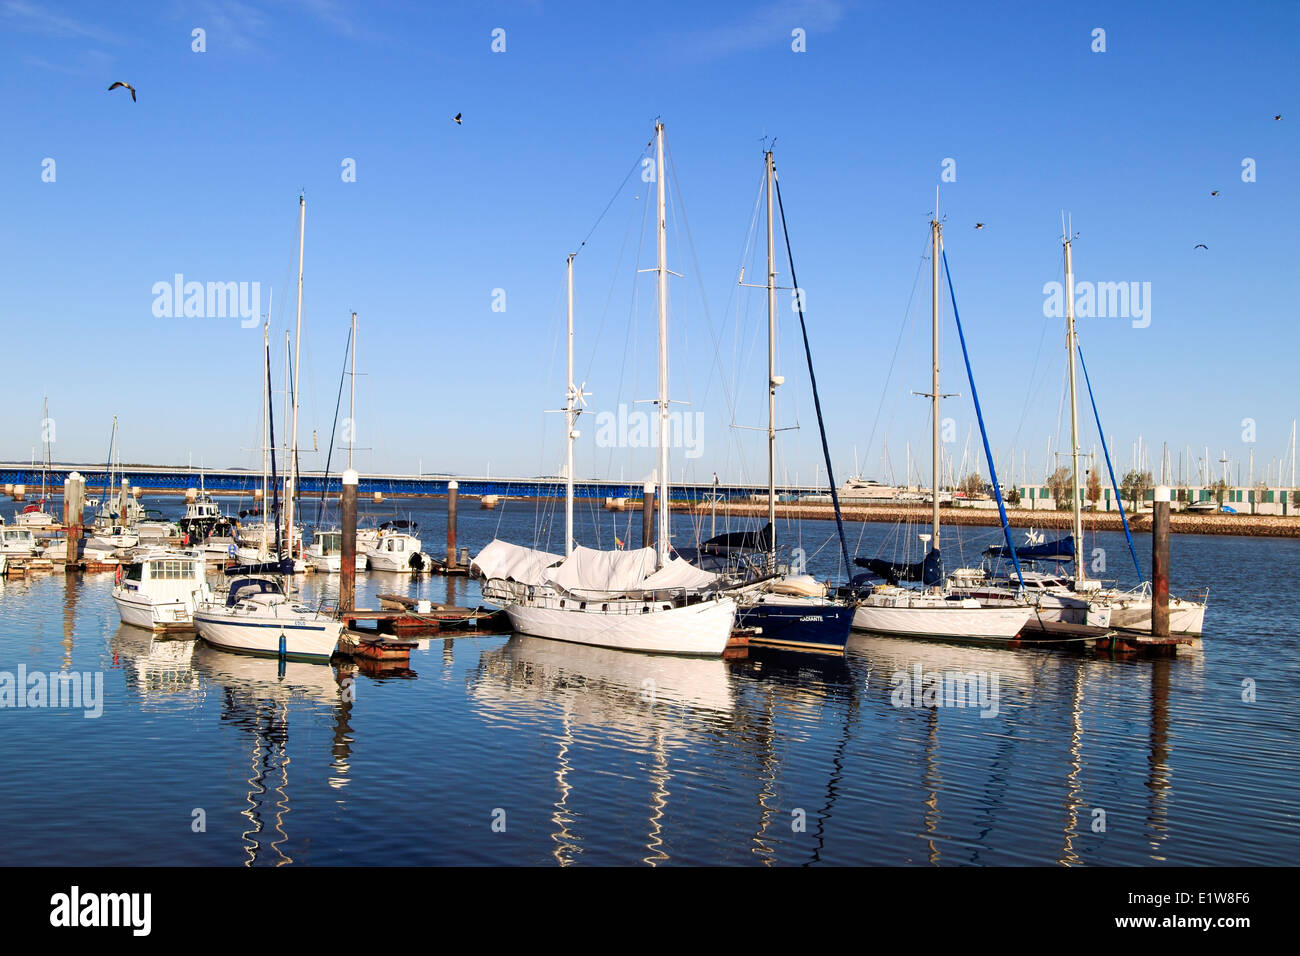 Yachts at the marina on the River Arade, Portimao Harbour, Algarve, Portugal Stock Photo